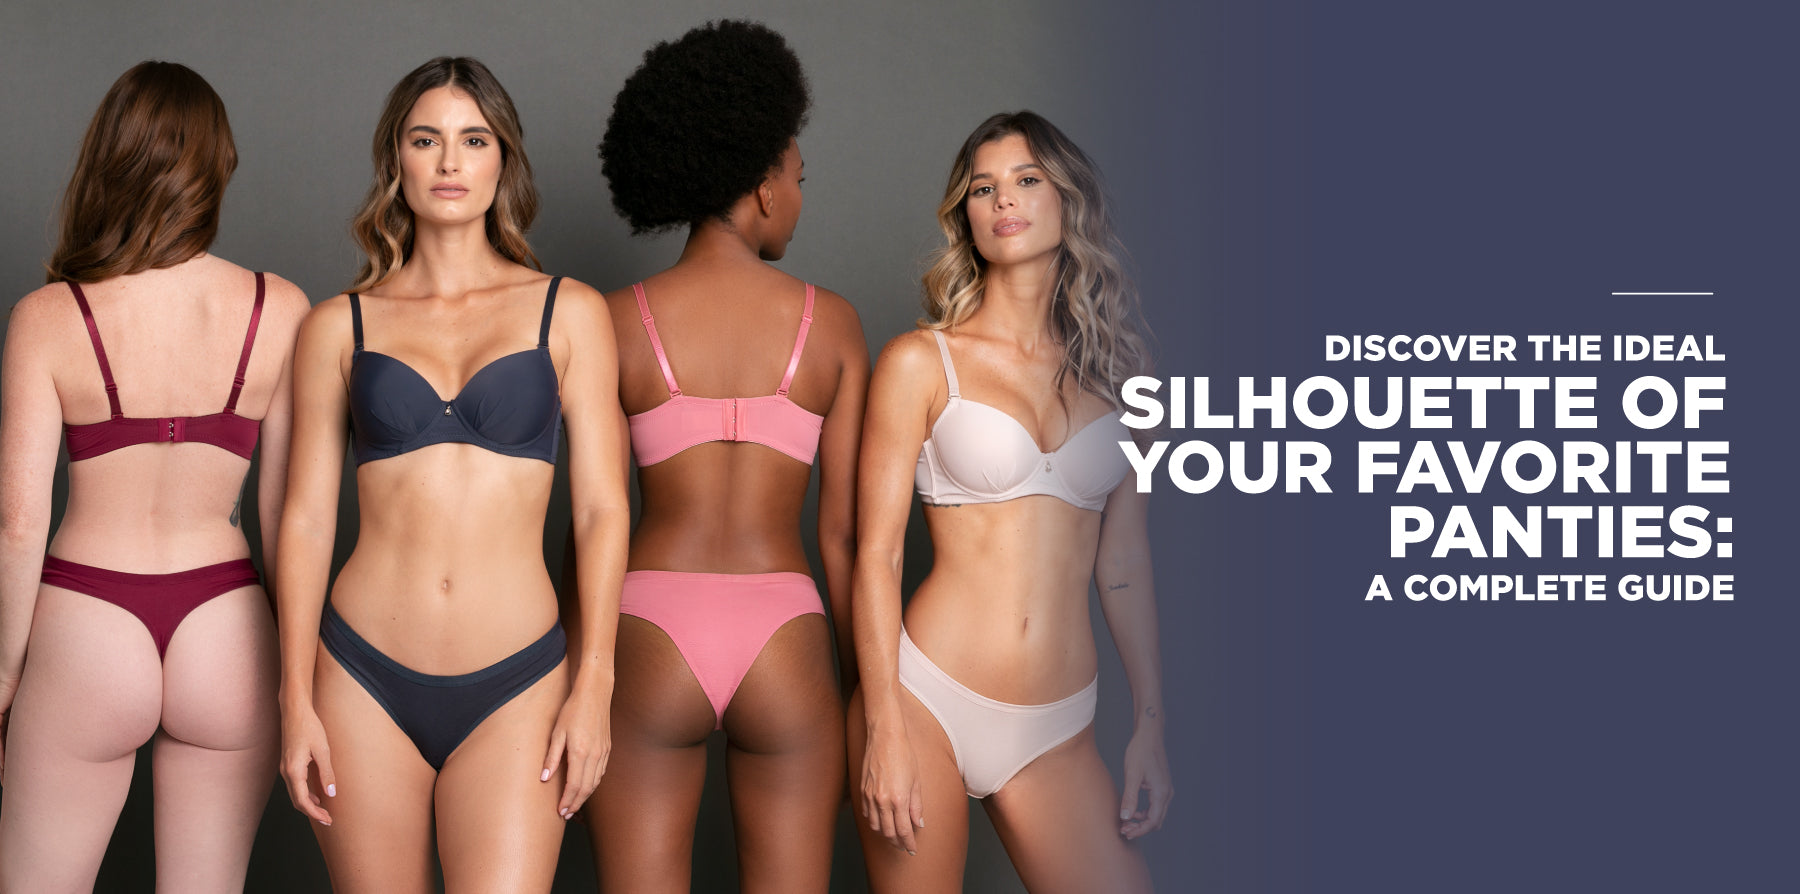 Discover the Ideal Silhouette of Your Favorite Panties: A Complete Guide